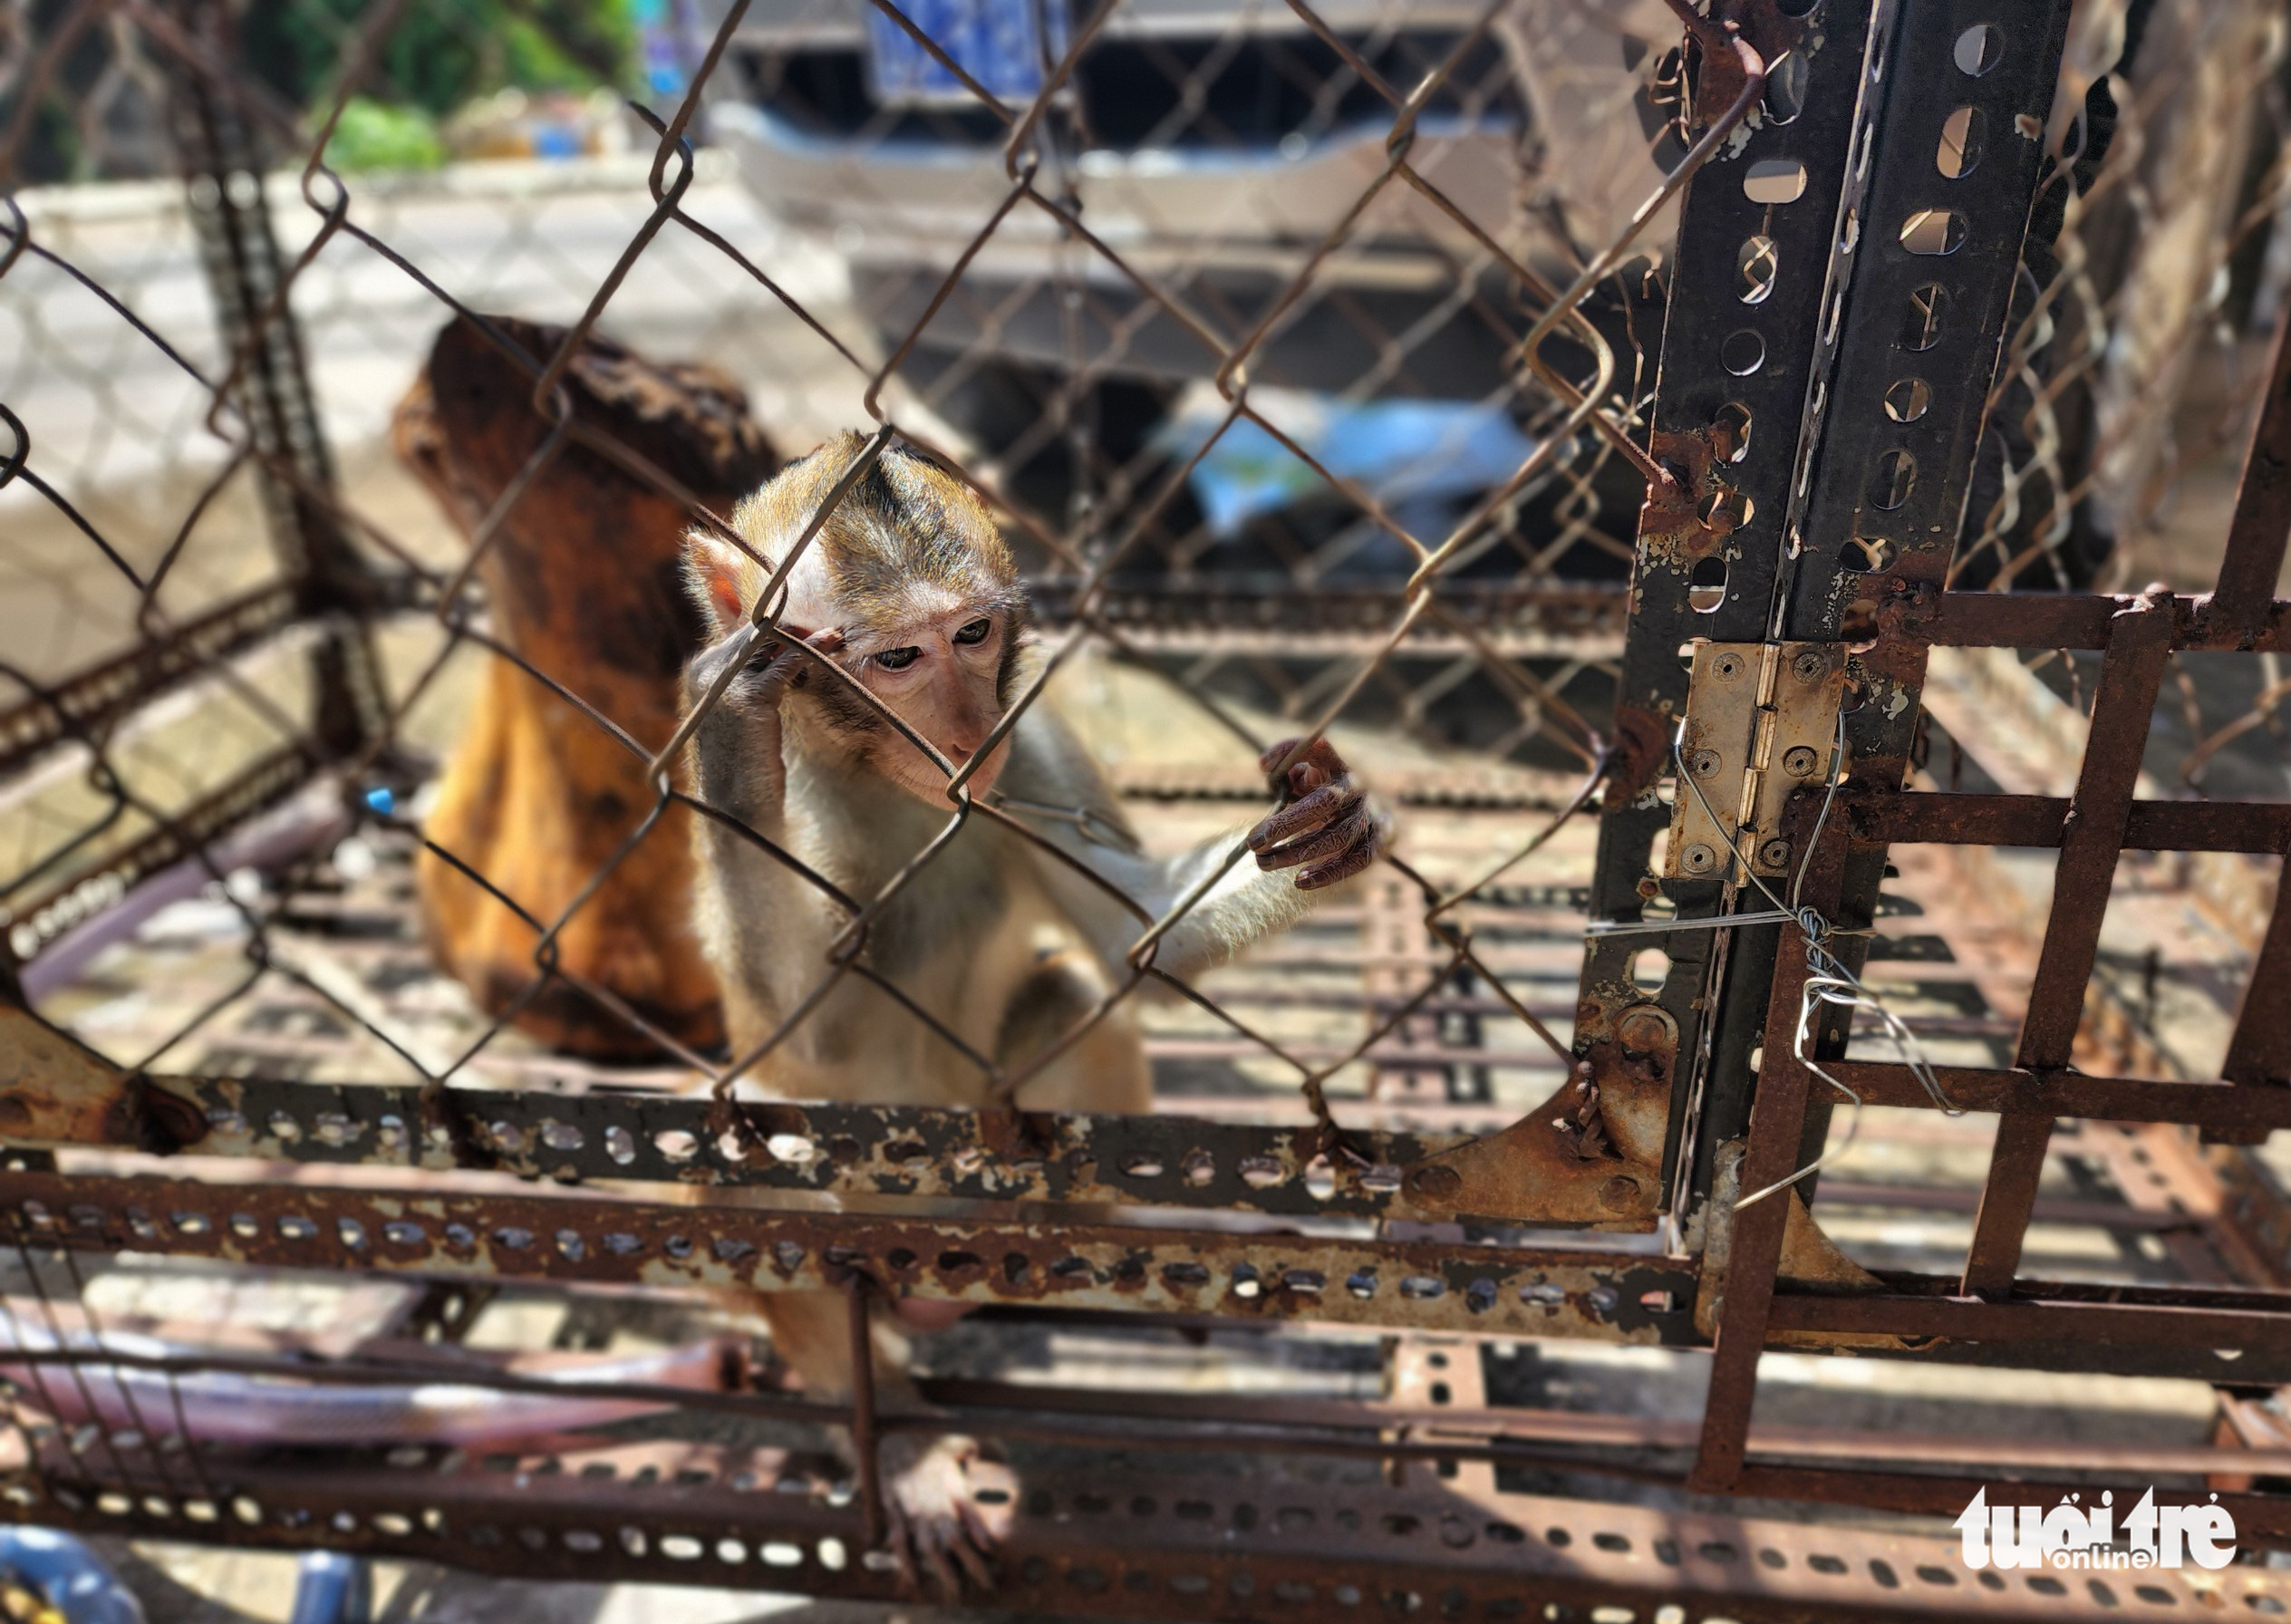 Man hands in rare, endangered macaque to Ho Chi Minh City rangers